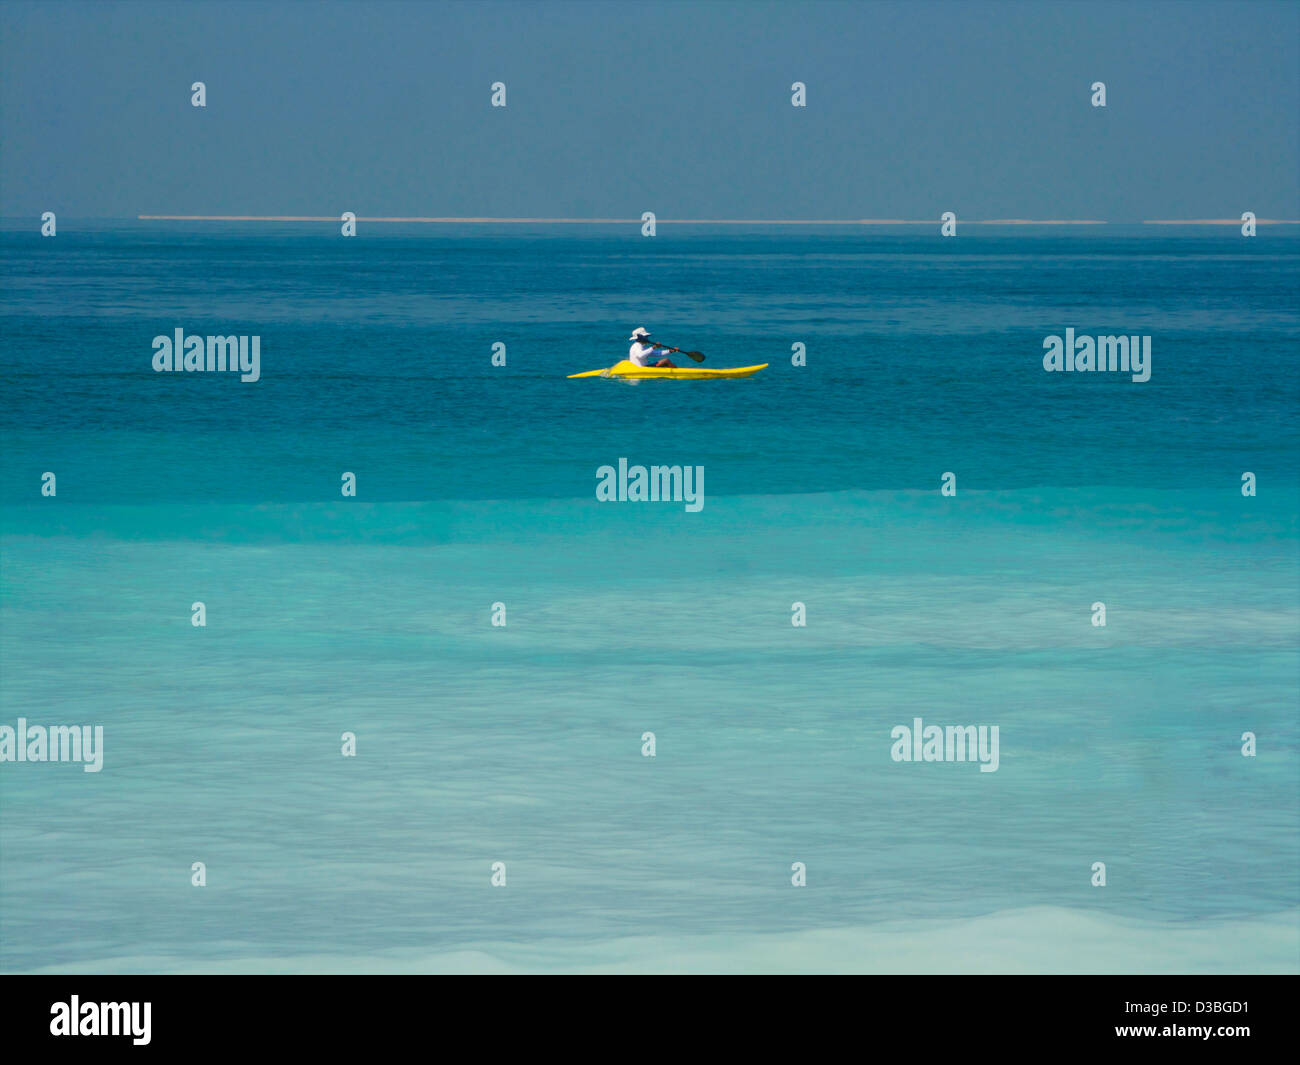 A lifeguard patrols the waters around the Burj al Arab hotel in a canoe through crystal blue waters Stock Photo